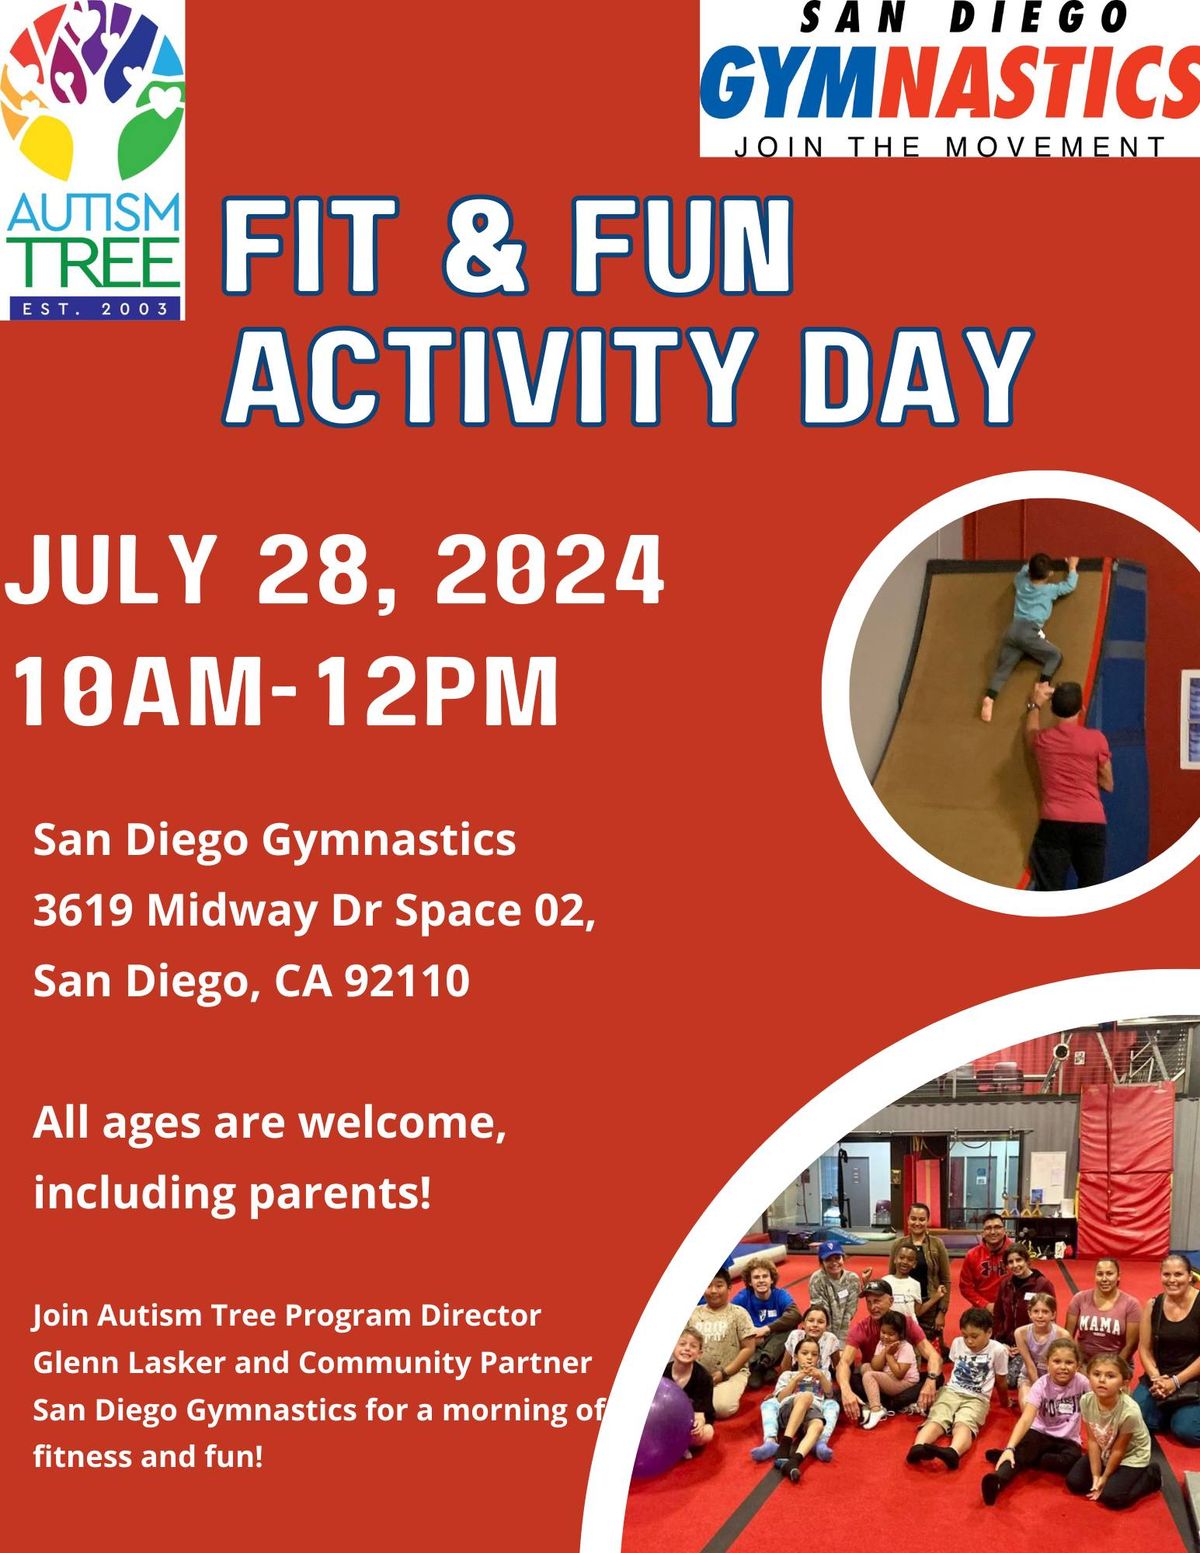 AT Fit & Fun Activity Day